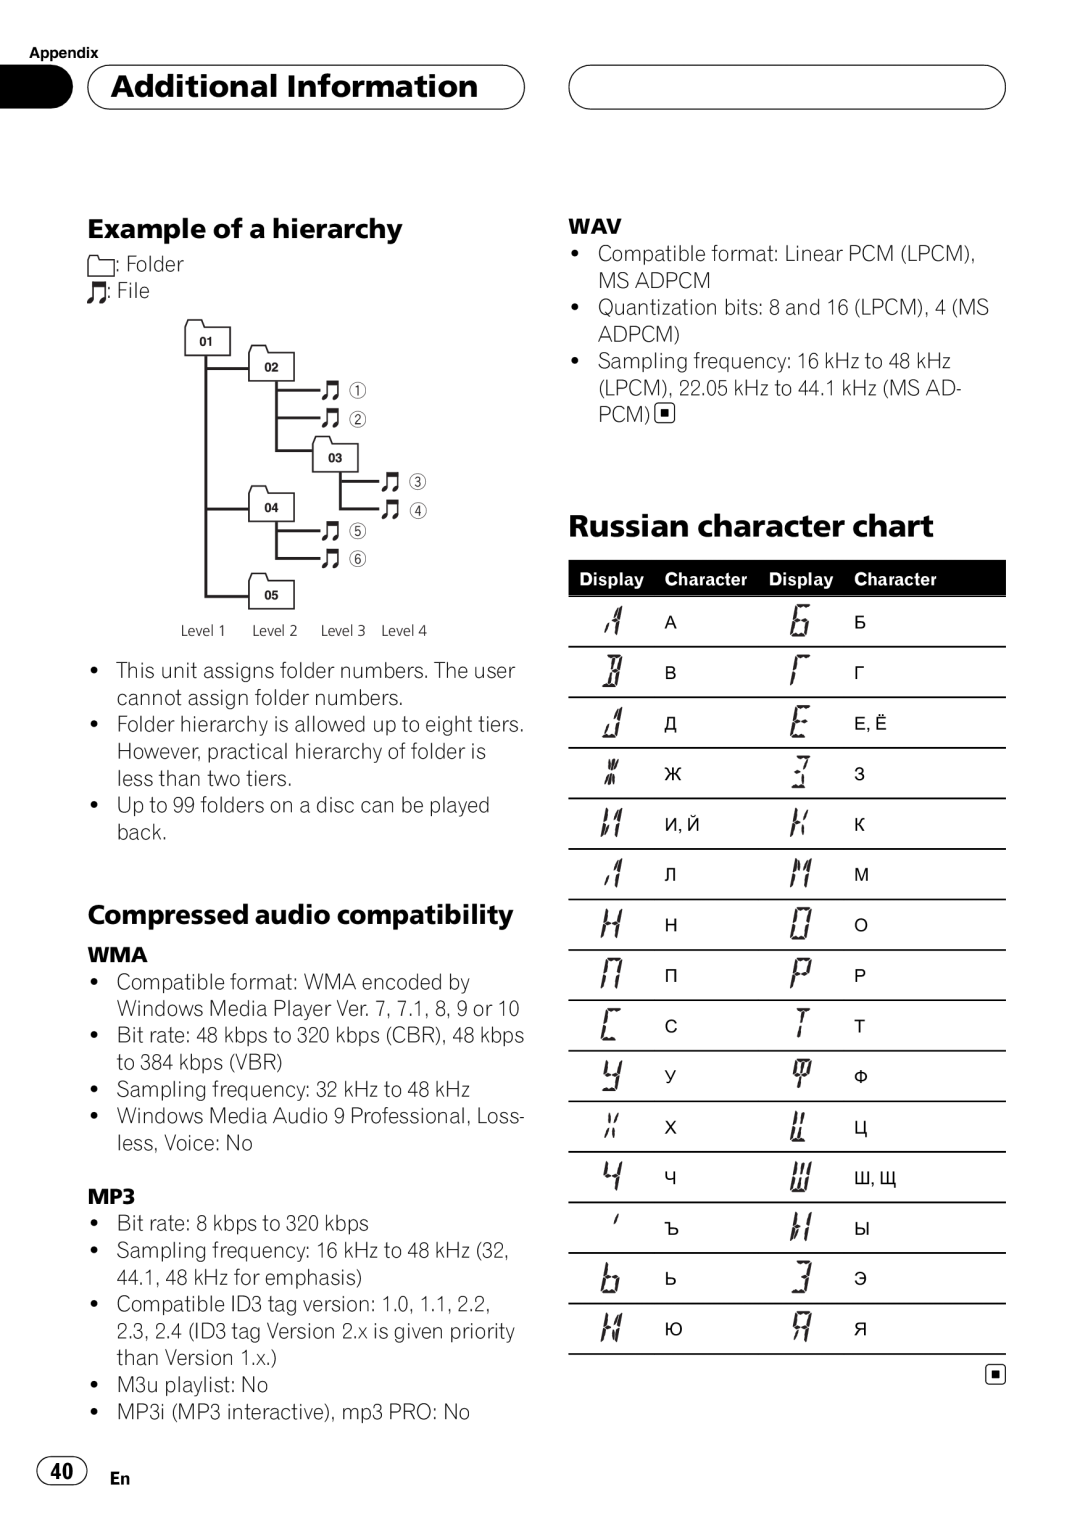 Pioneer RDS DEH-P40MP operation manual Russian character chart, Example of a hierarchy, Compressed audio compatibility 